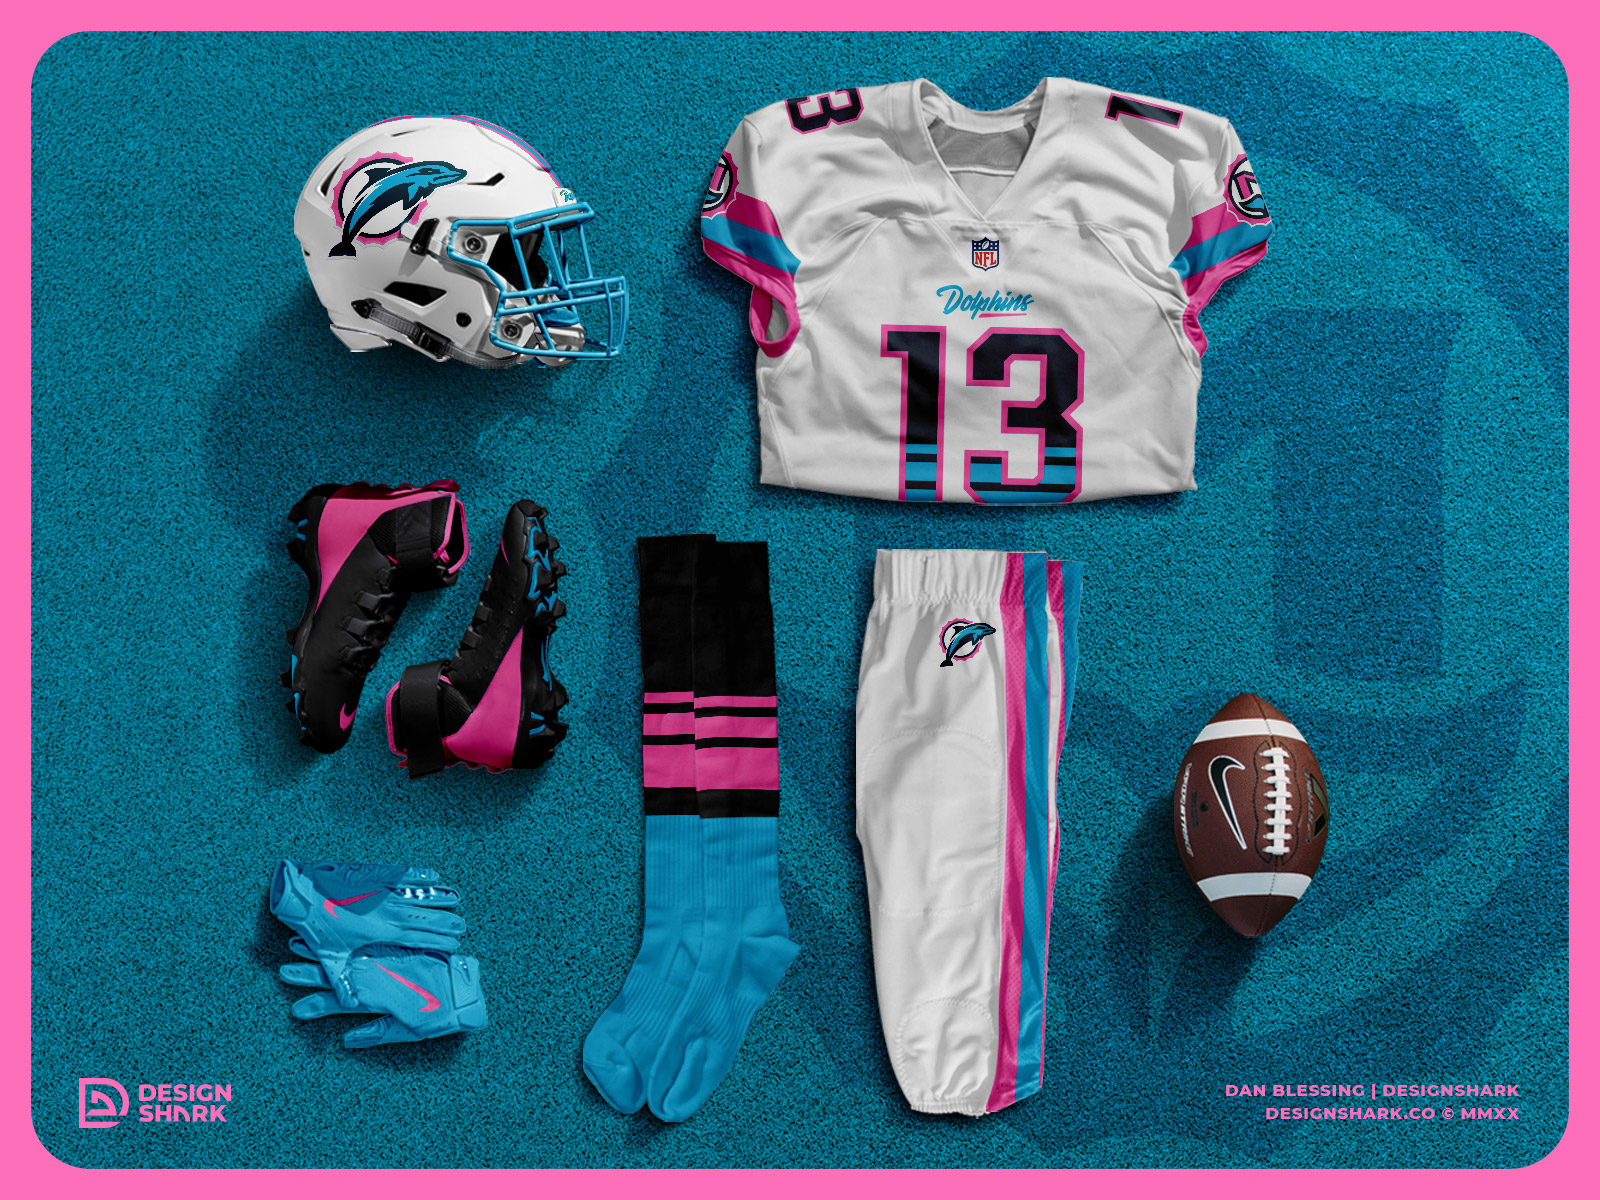 miami dolphins pink jersey